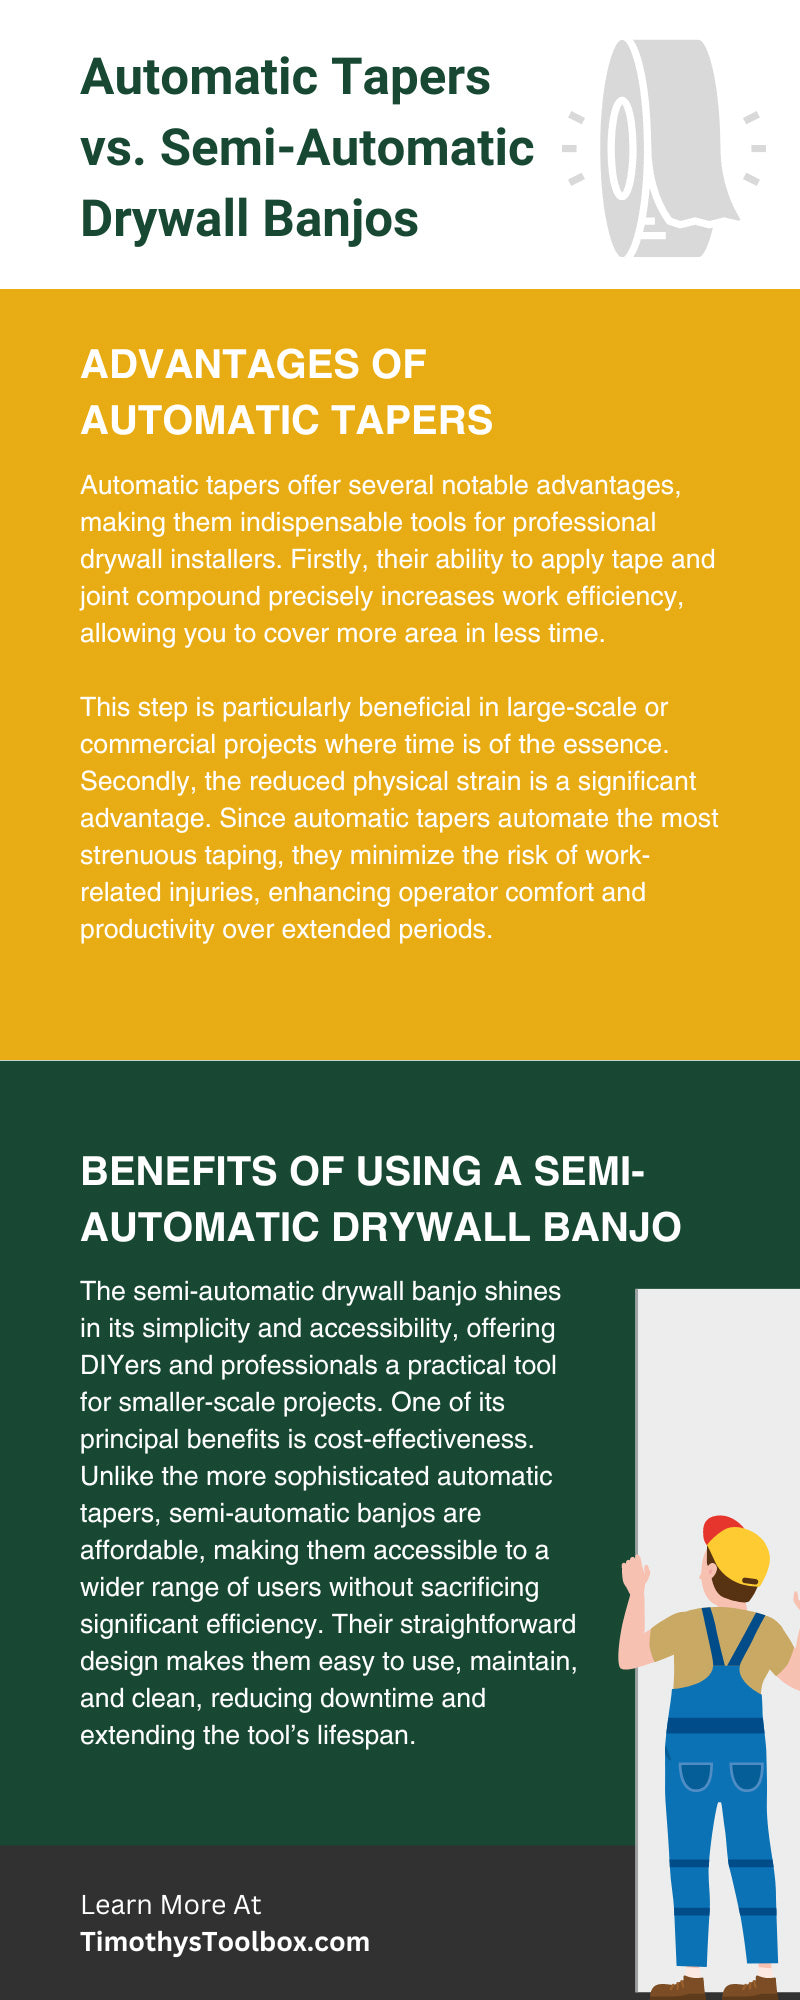 Automatic Tapers Vs. Semi-Automatic Drywall Banjos